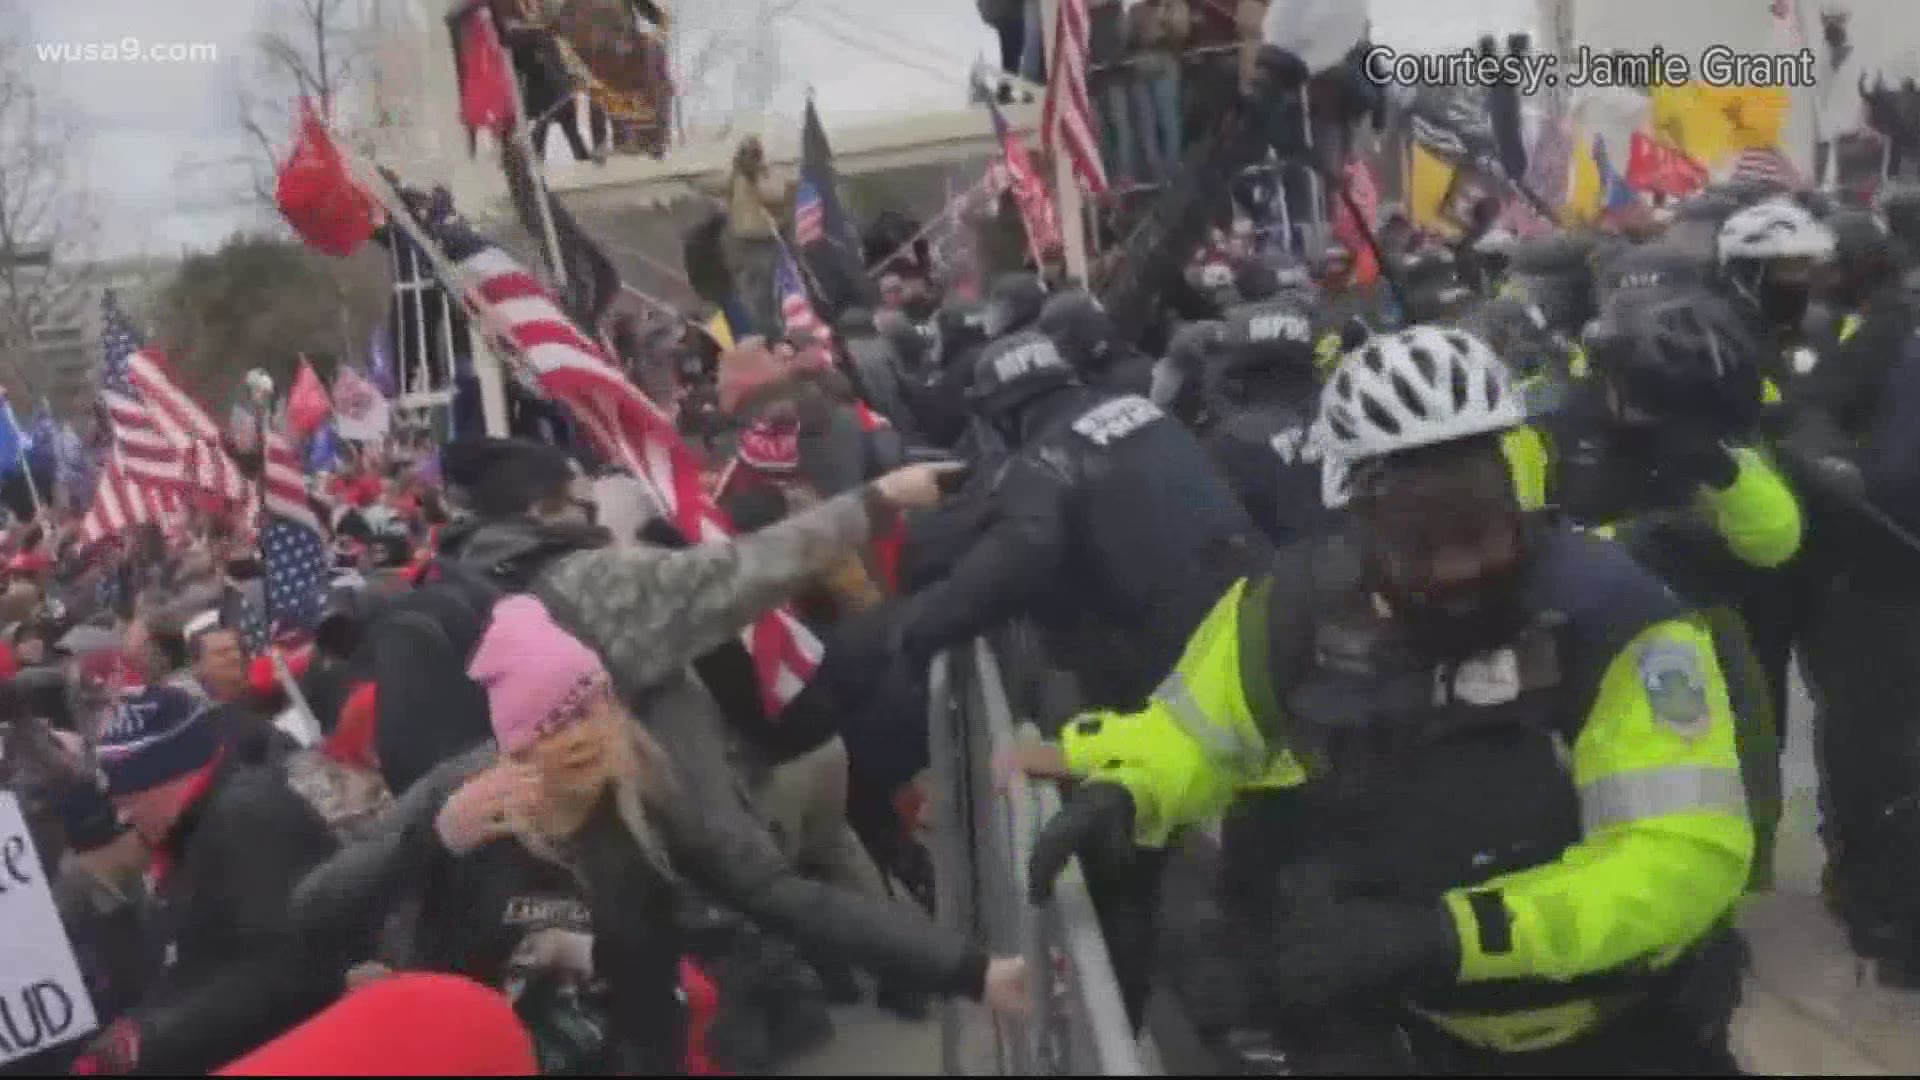 A man who traveled from Memphis, Tennessee, said police were ill prepared for the Capitol riot.